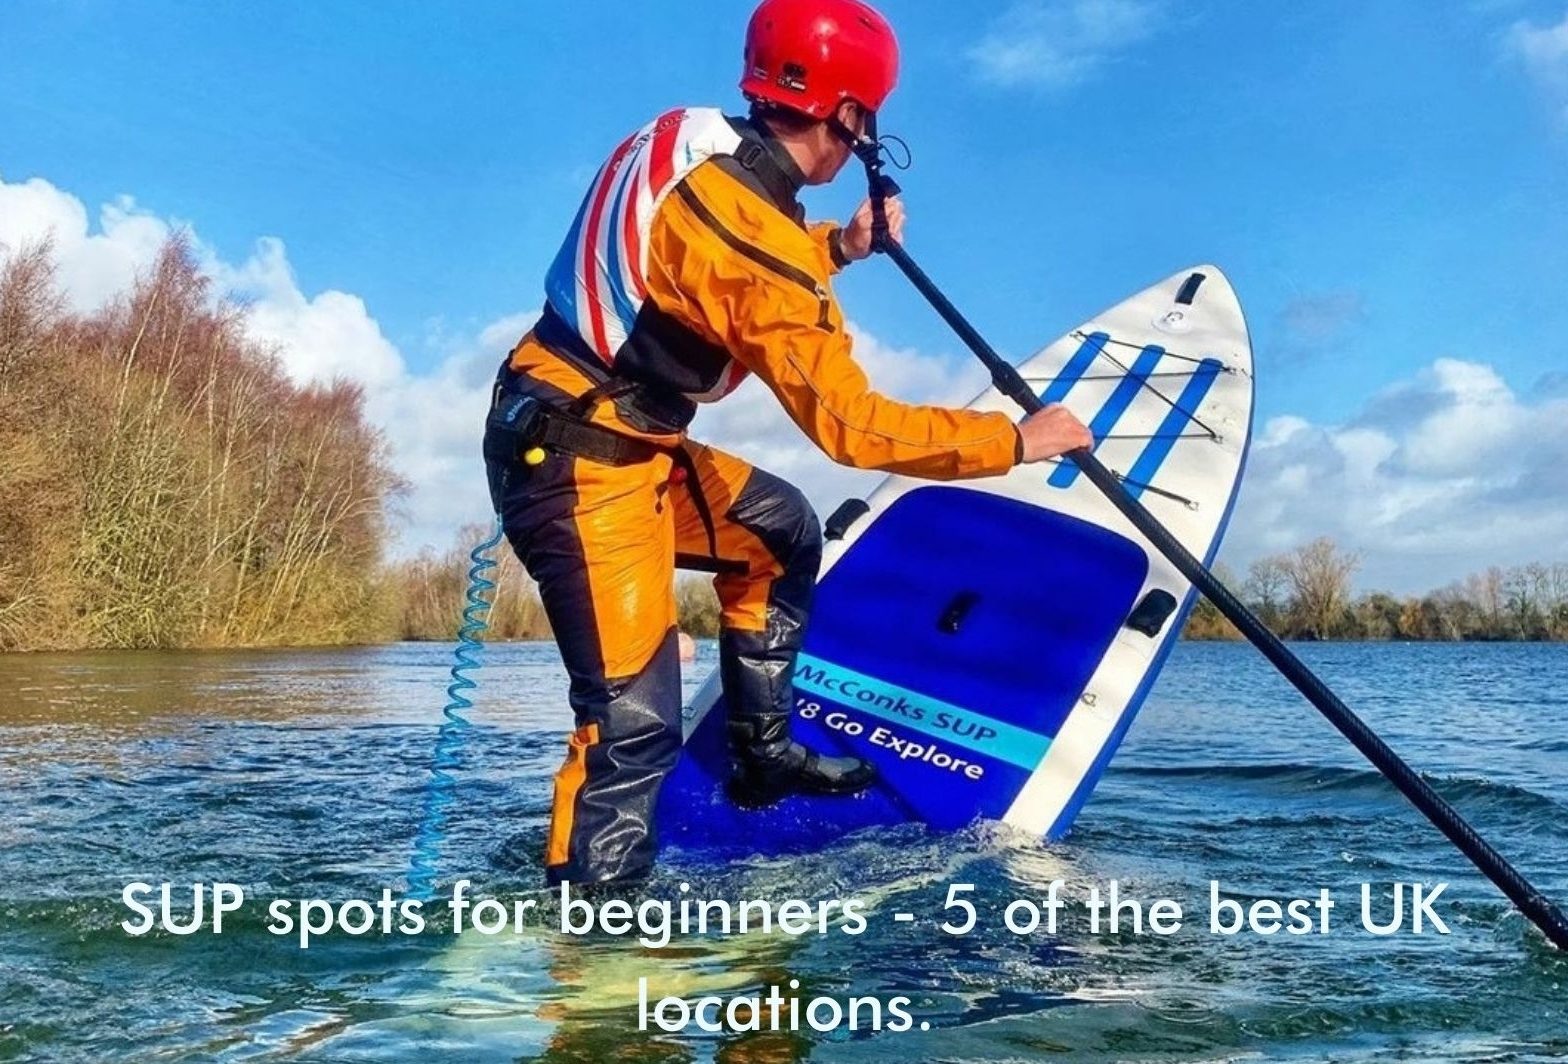 You are currently viewing SUP spots for beginners – 5 great locations in Southern(ish) England.